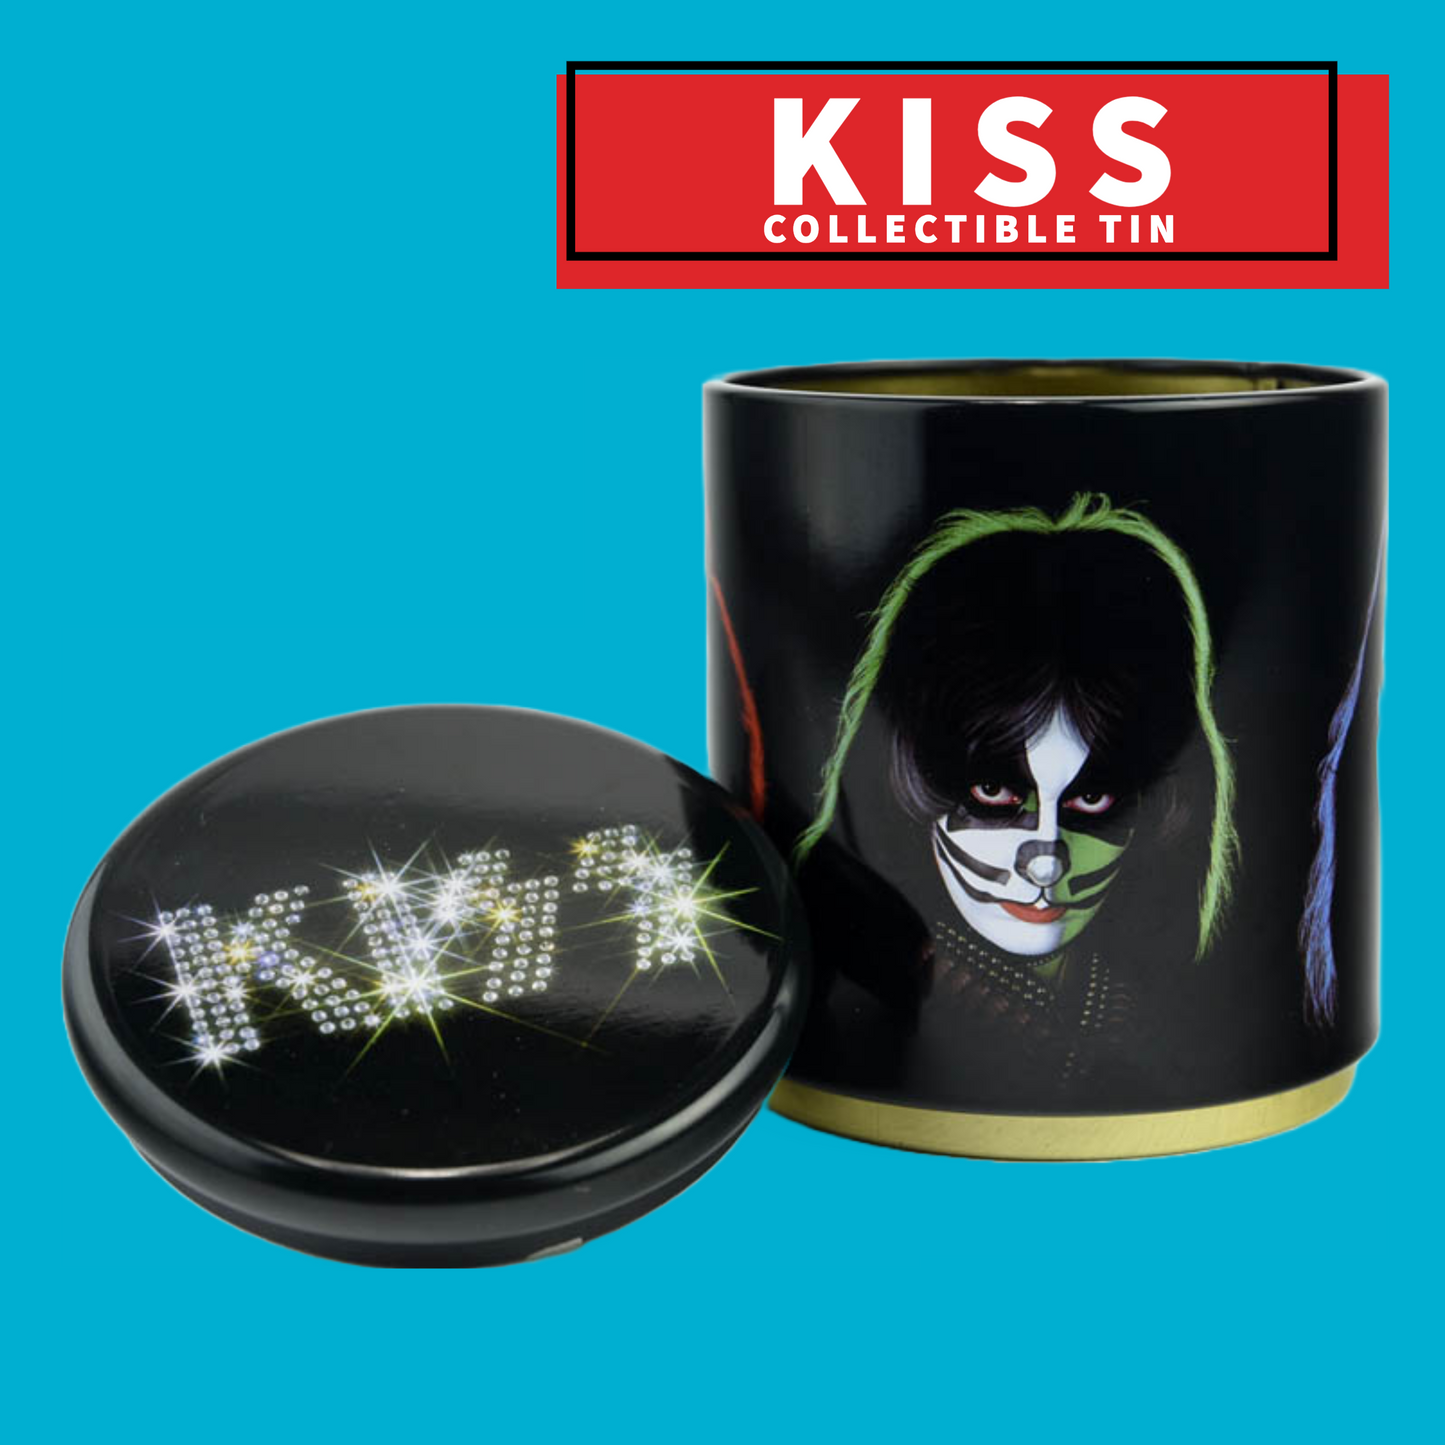 Kiss Solo Albums - Stackable Metal Tin